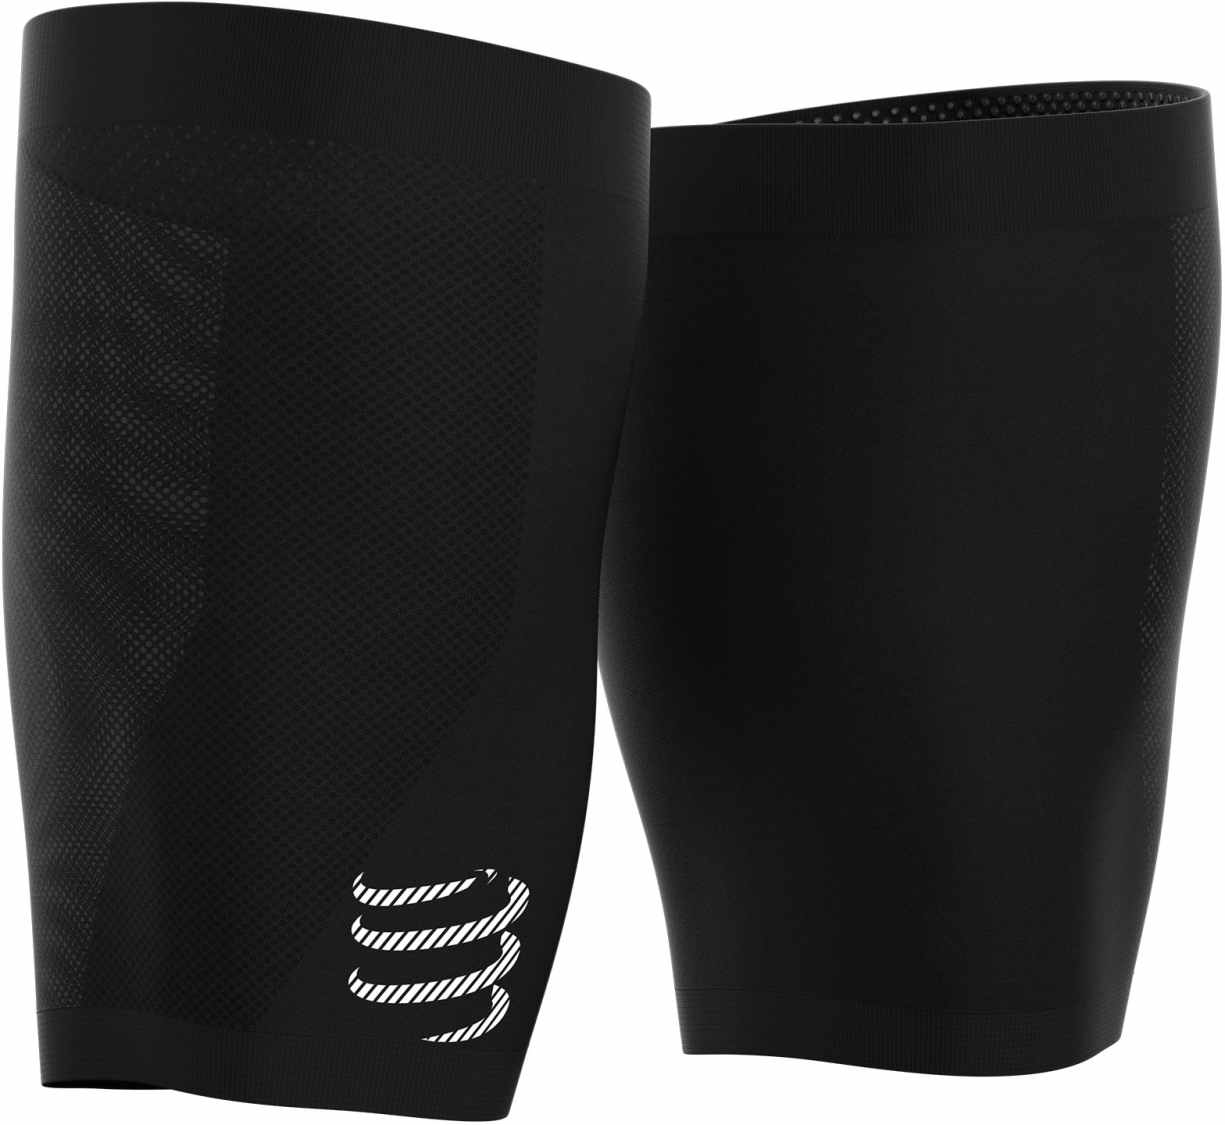 Compression thigh sleeves